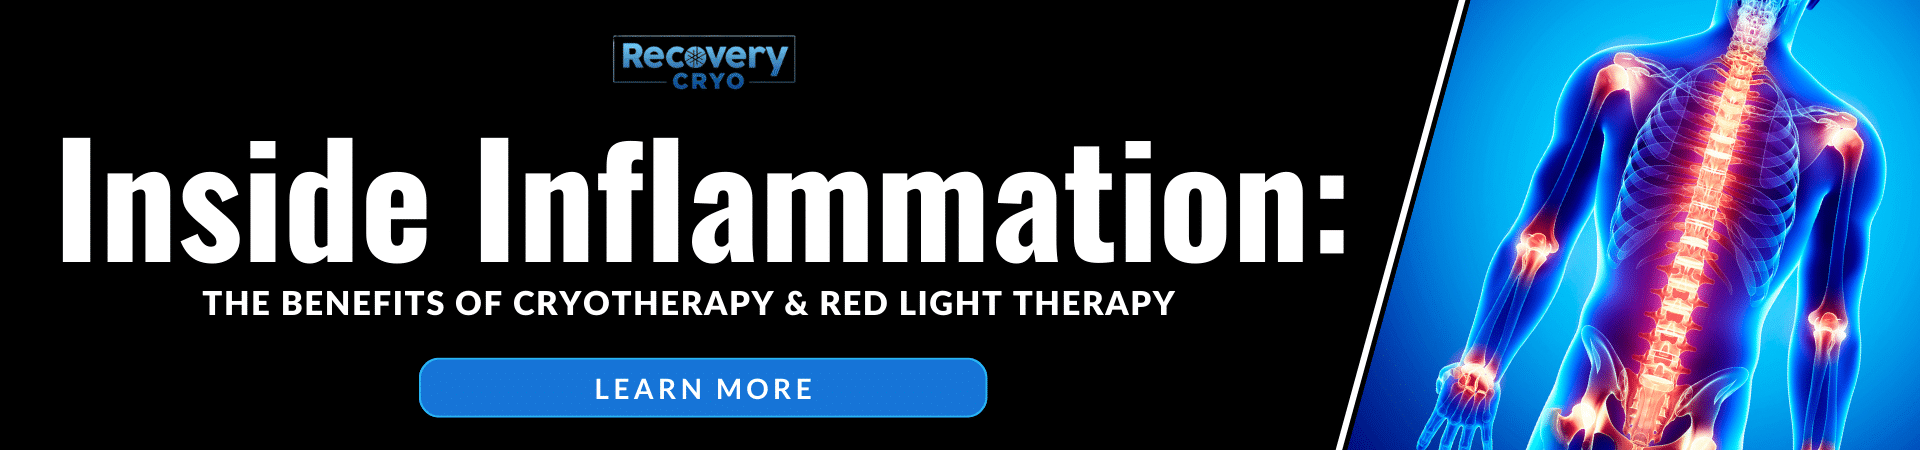 Inside Inflammation: The Benefits of Cryotherapy and Red Light Therapy